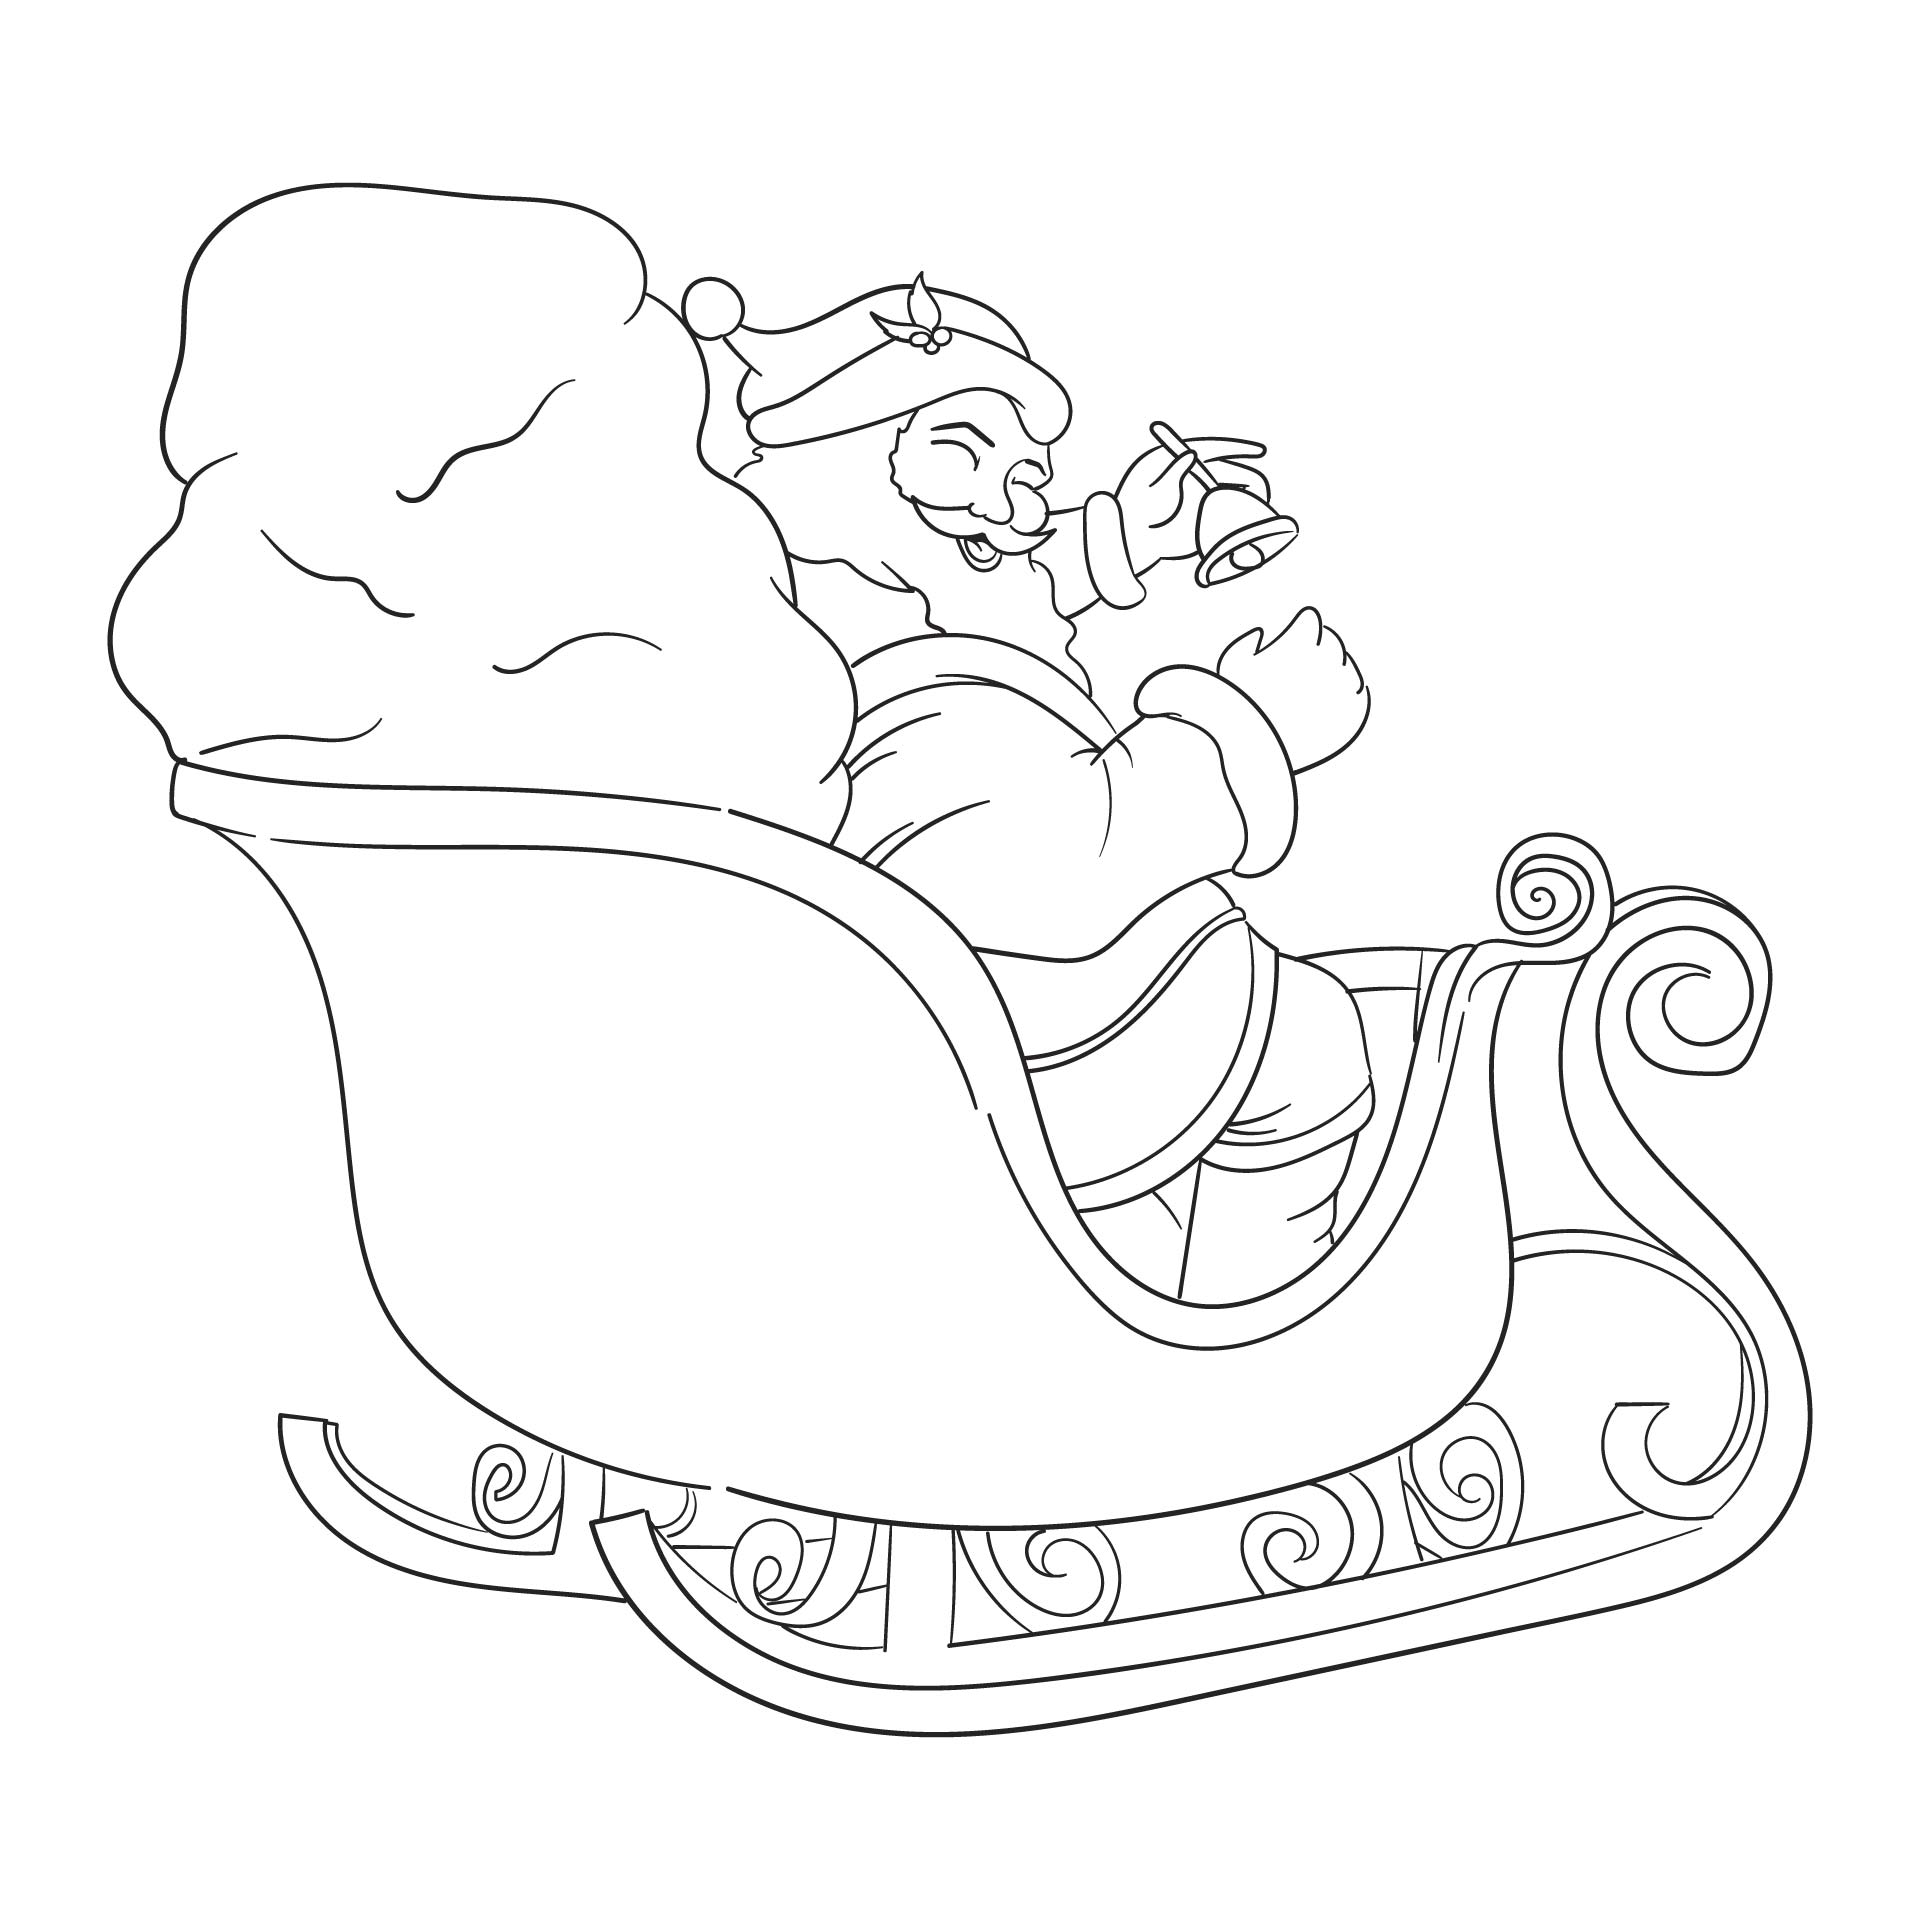 Printable Santa Claus Coloring Pages For Kids